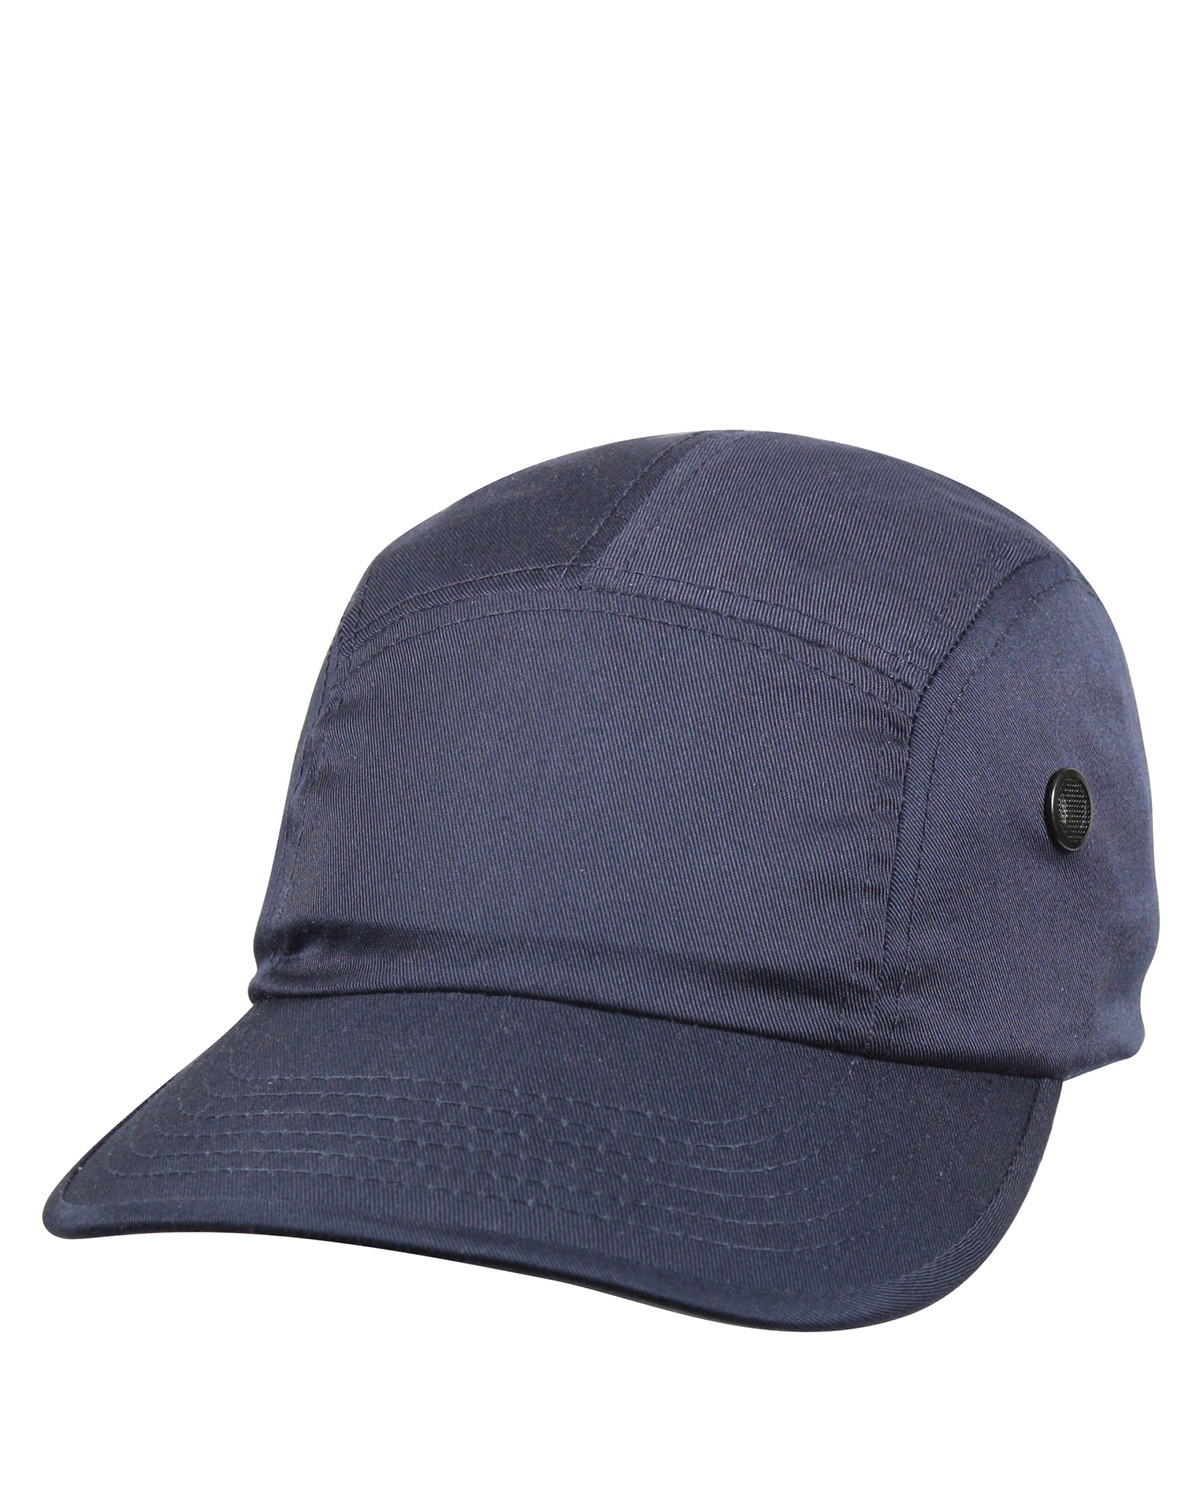 Rothco 5 Panel Military Street Cap (Navy, One Size)